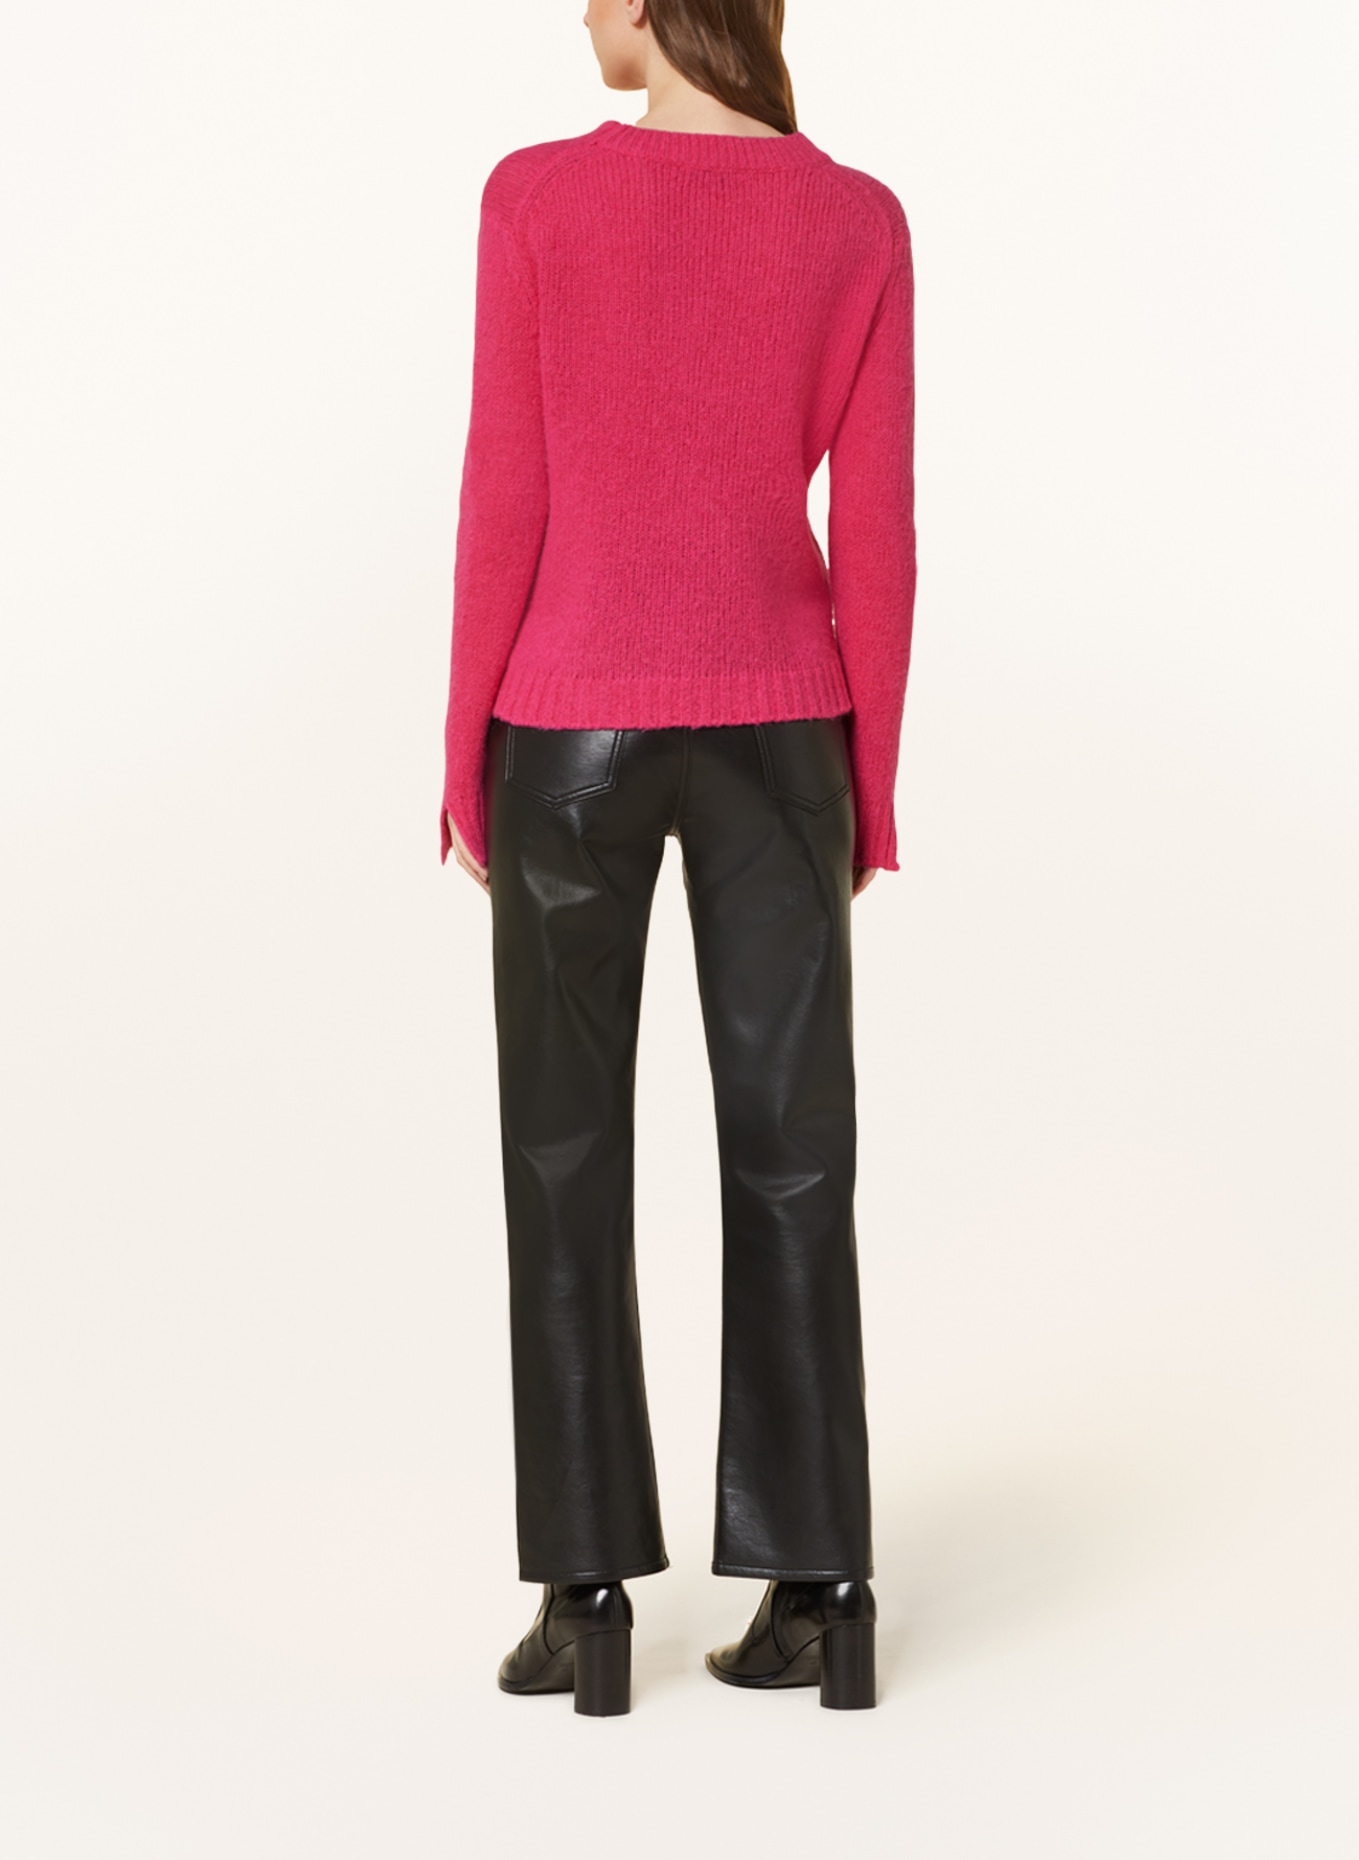 Princess GOES HOLLYWOOD Oversized sweater, Color: PINK (Image 3)